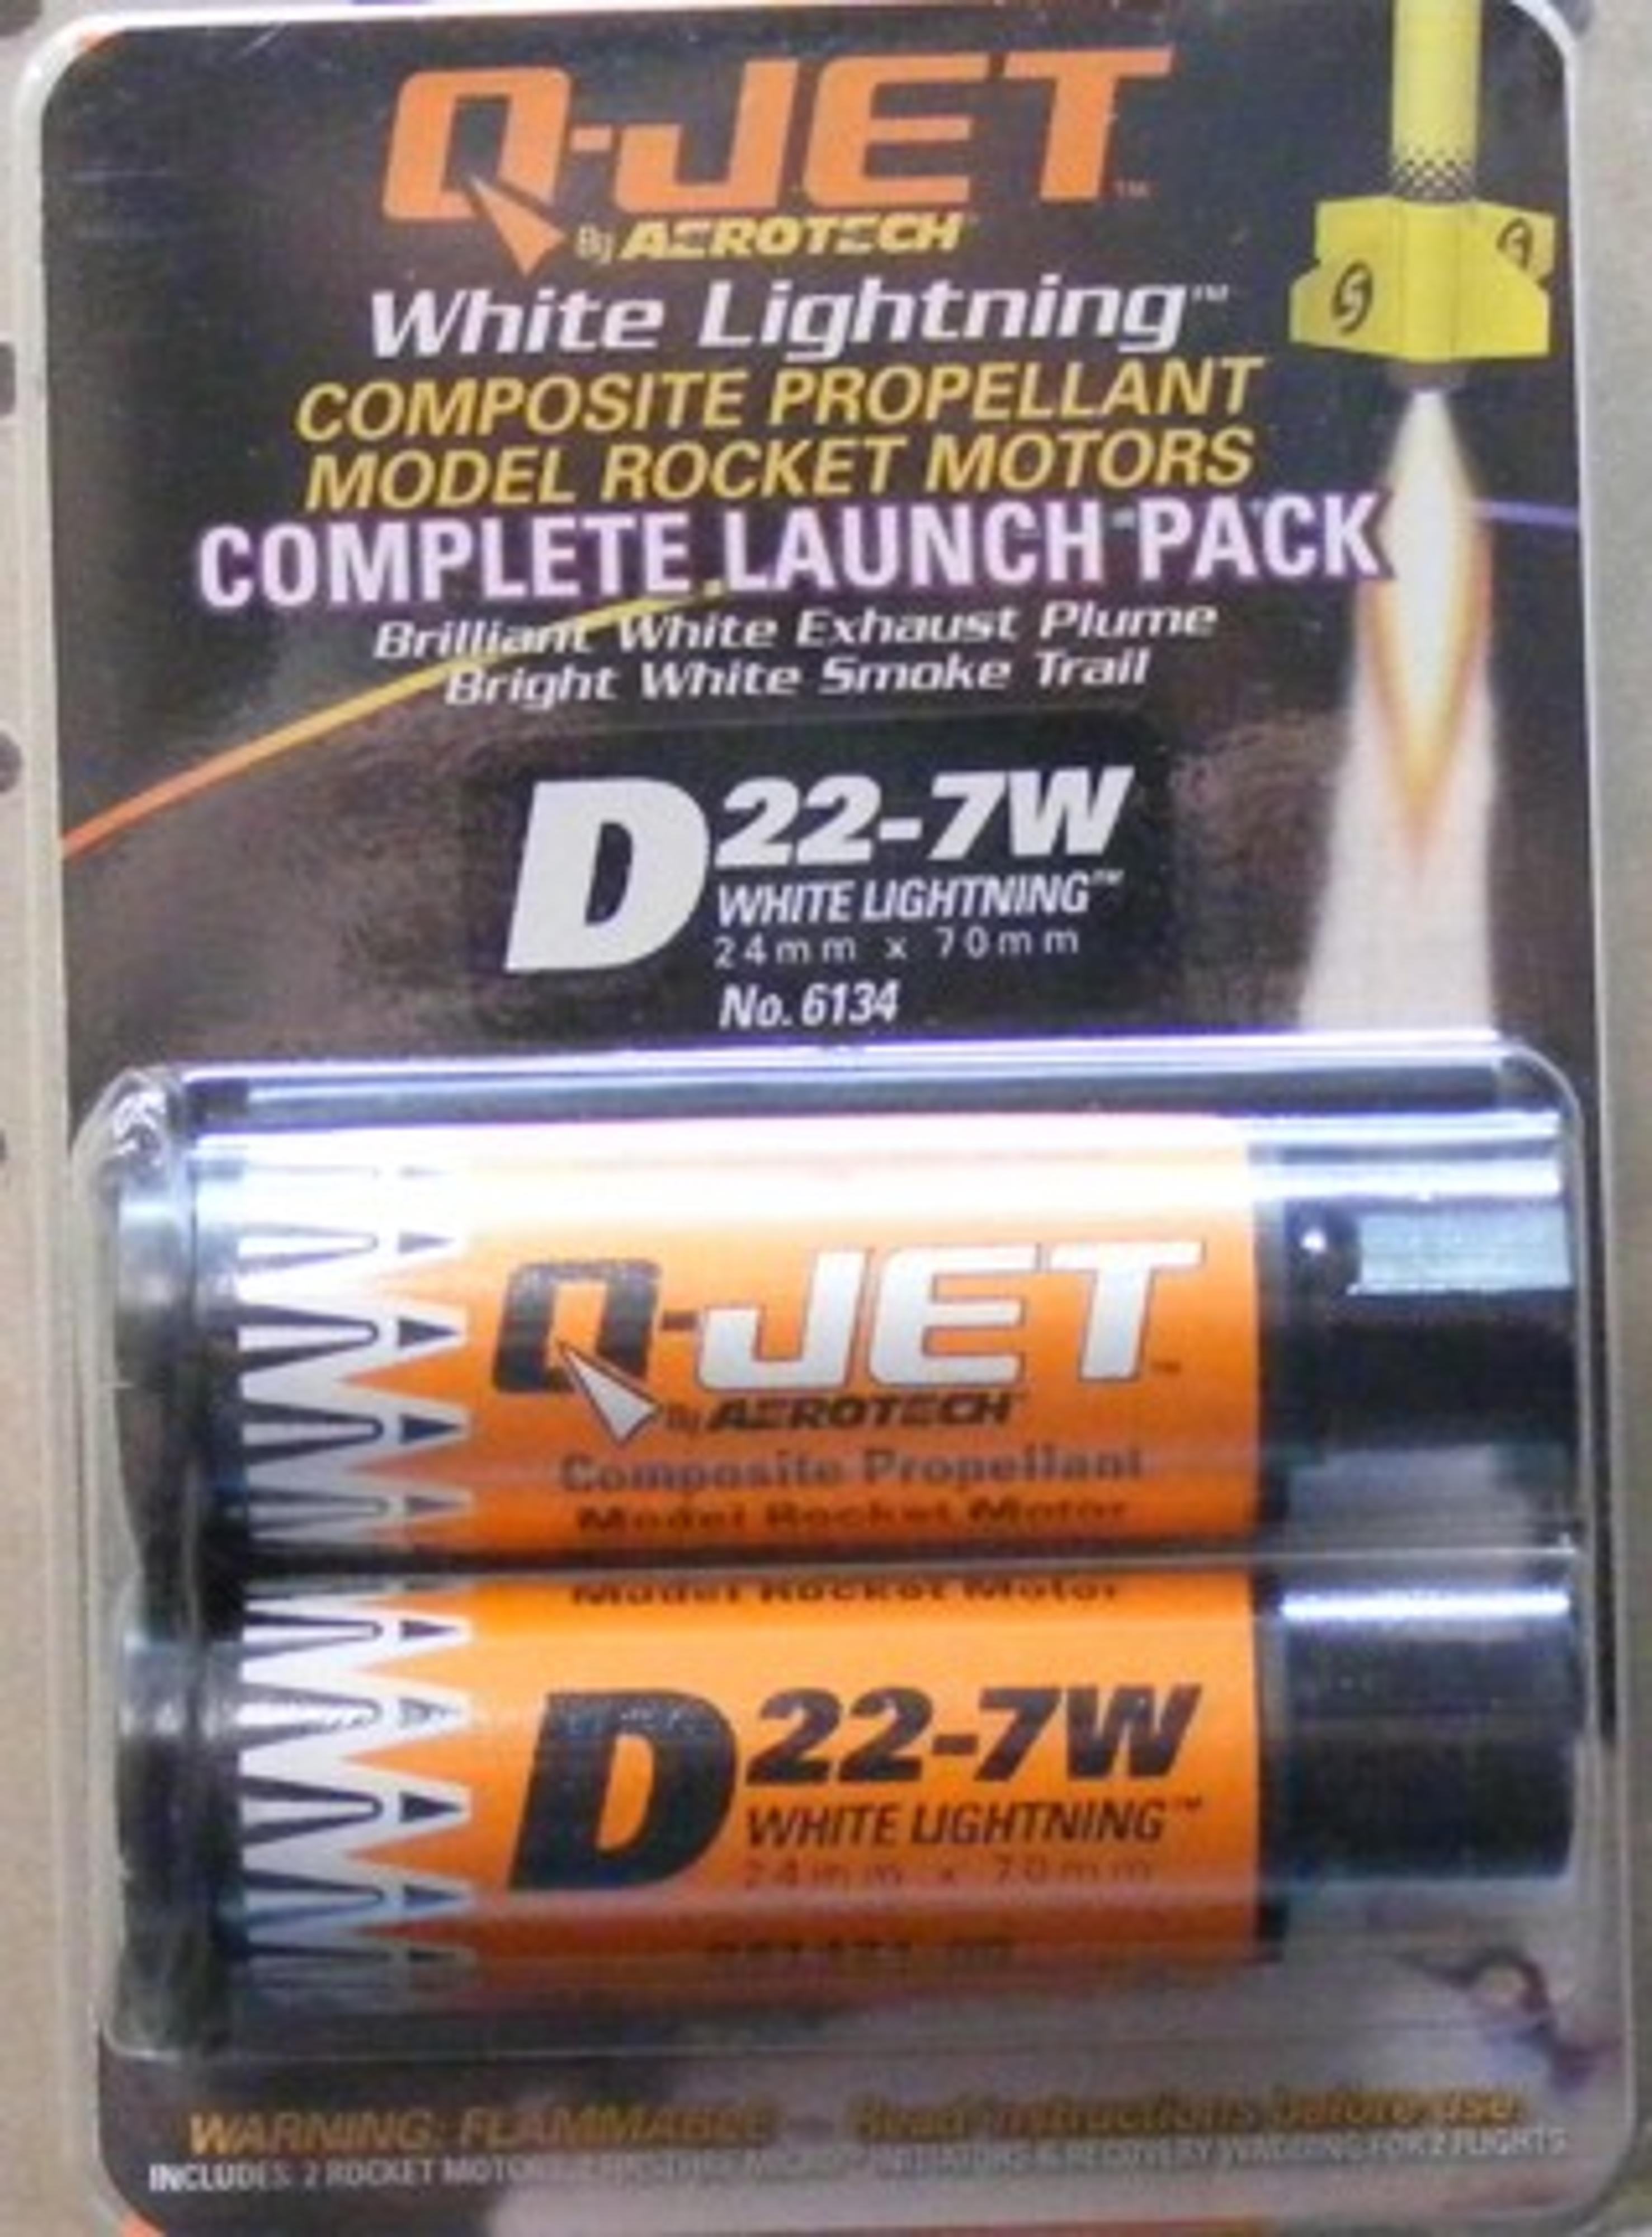 Quest Q-Jet D22-7W White Lightning Complete 2-Motor Launch Pack